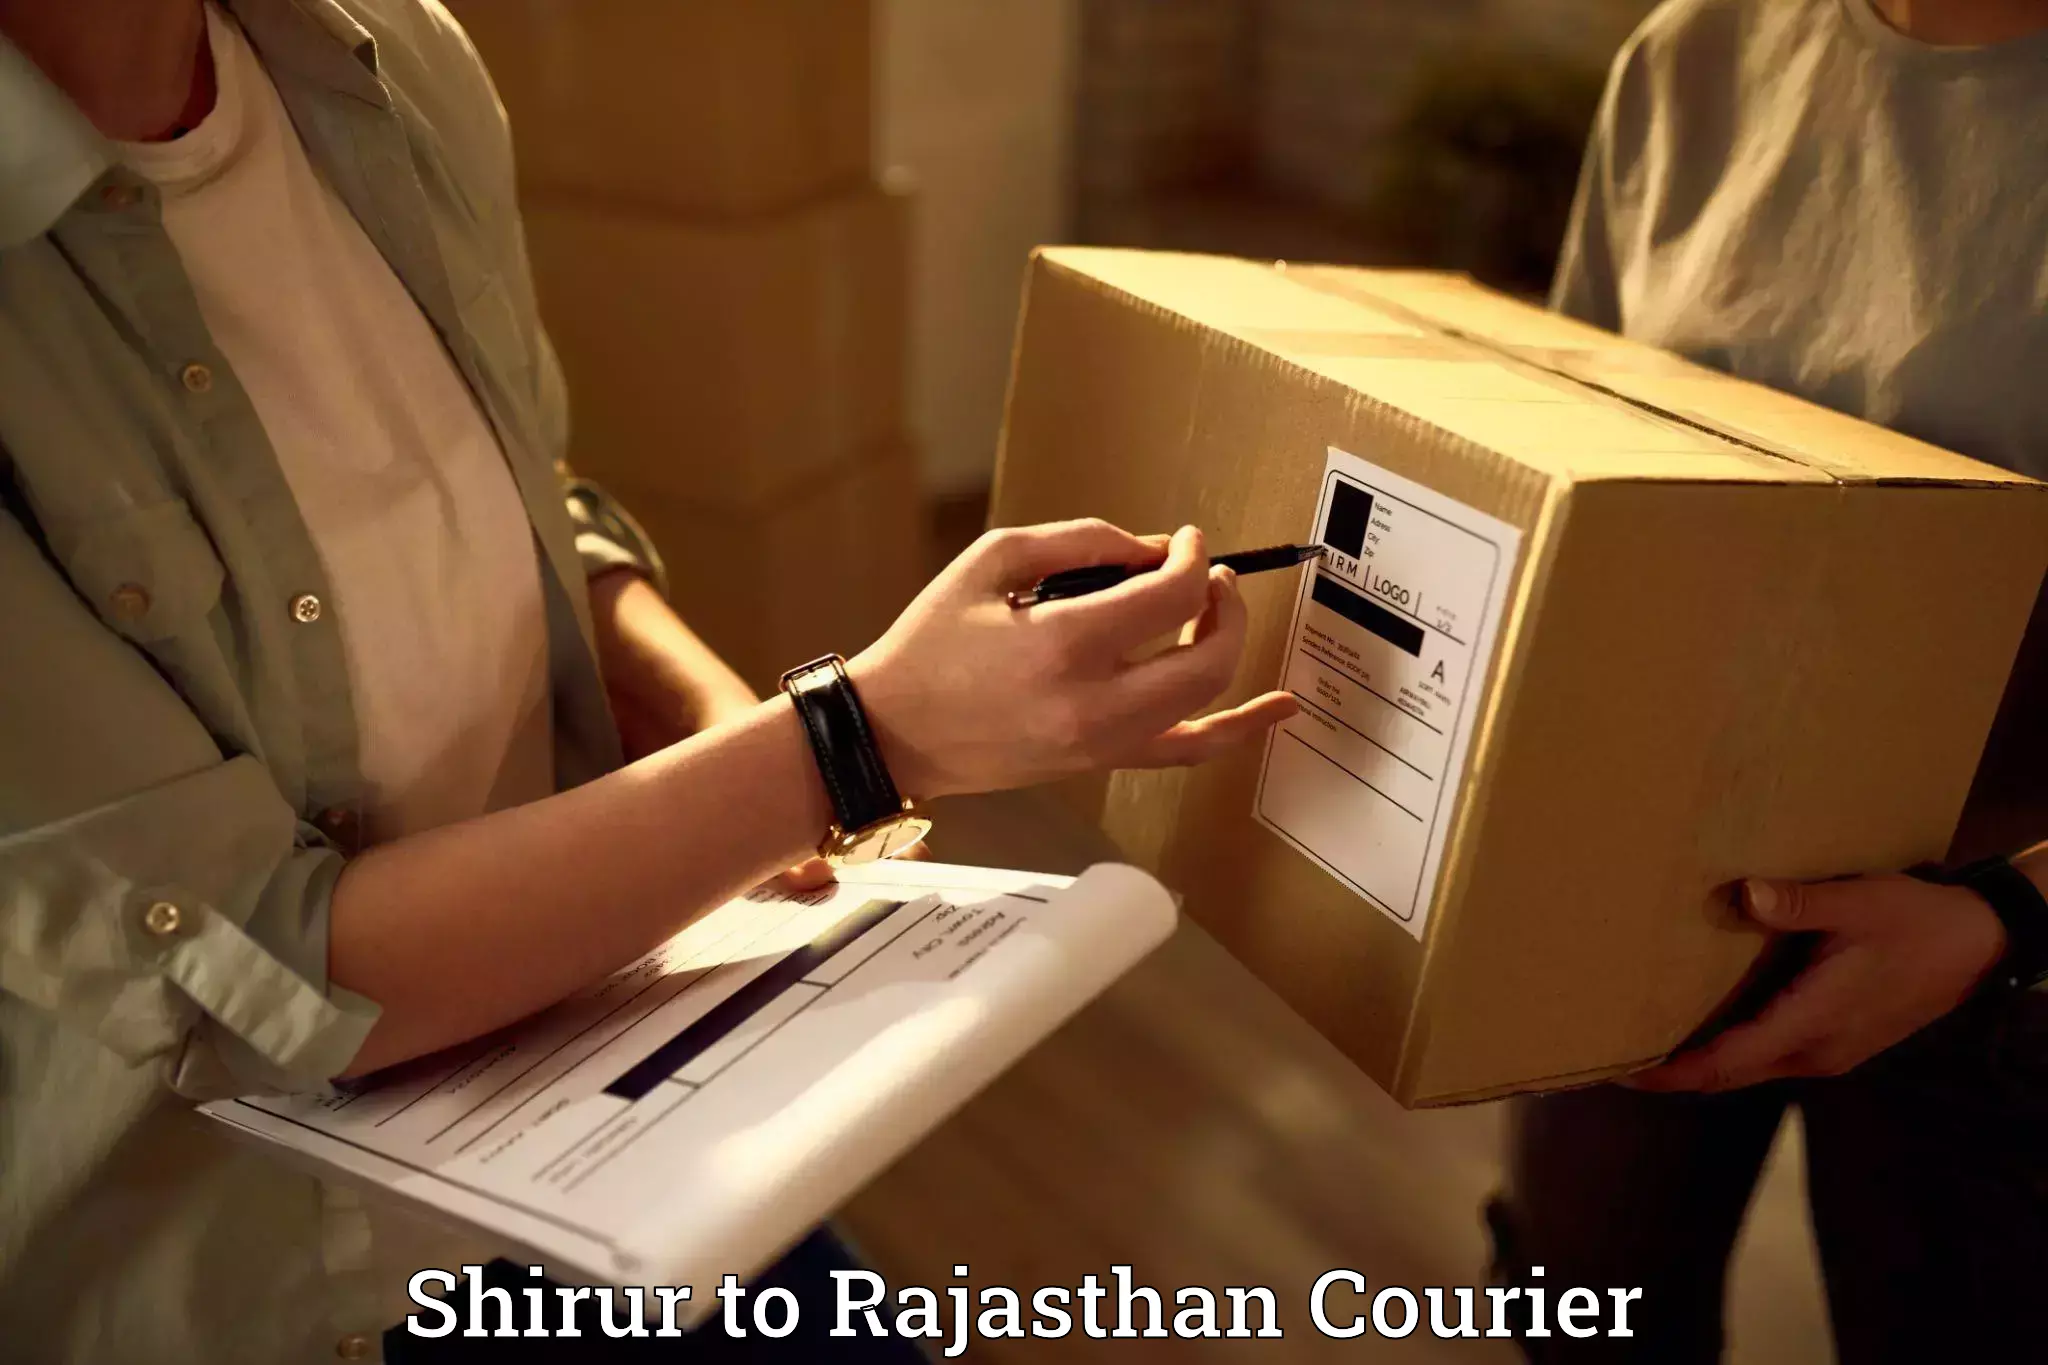 Trusted relocation experts in Shirur to Rajgarh Rajasthan